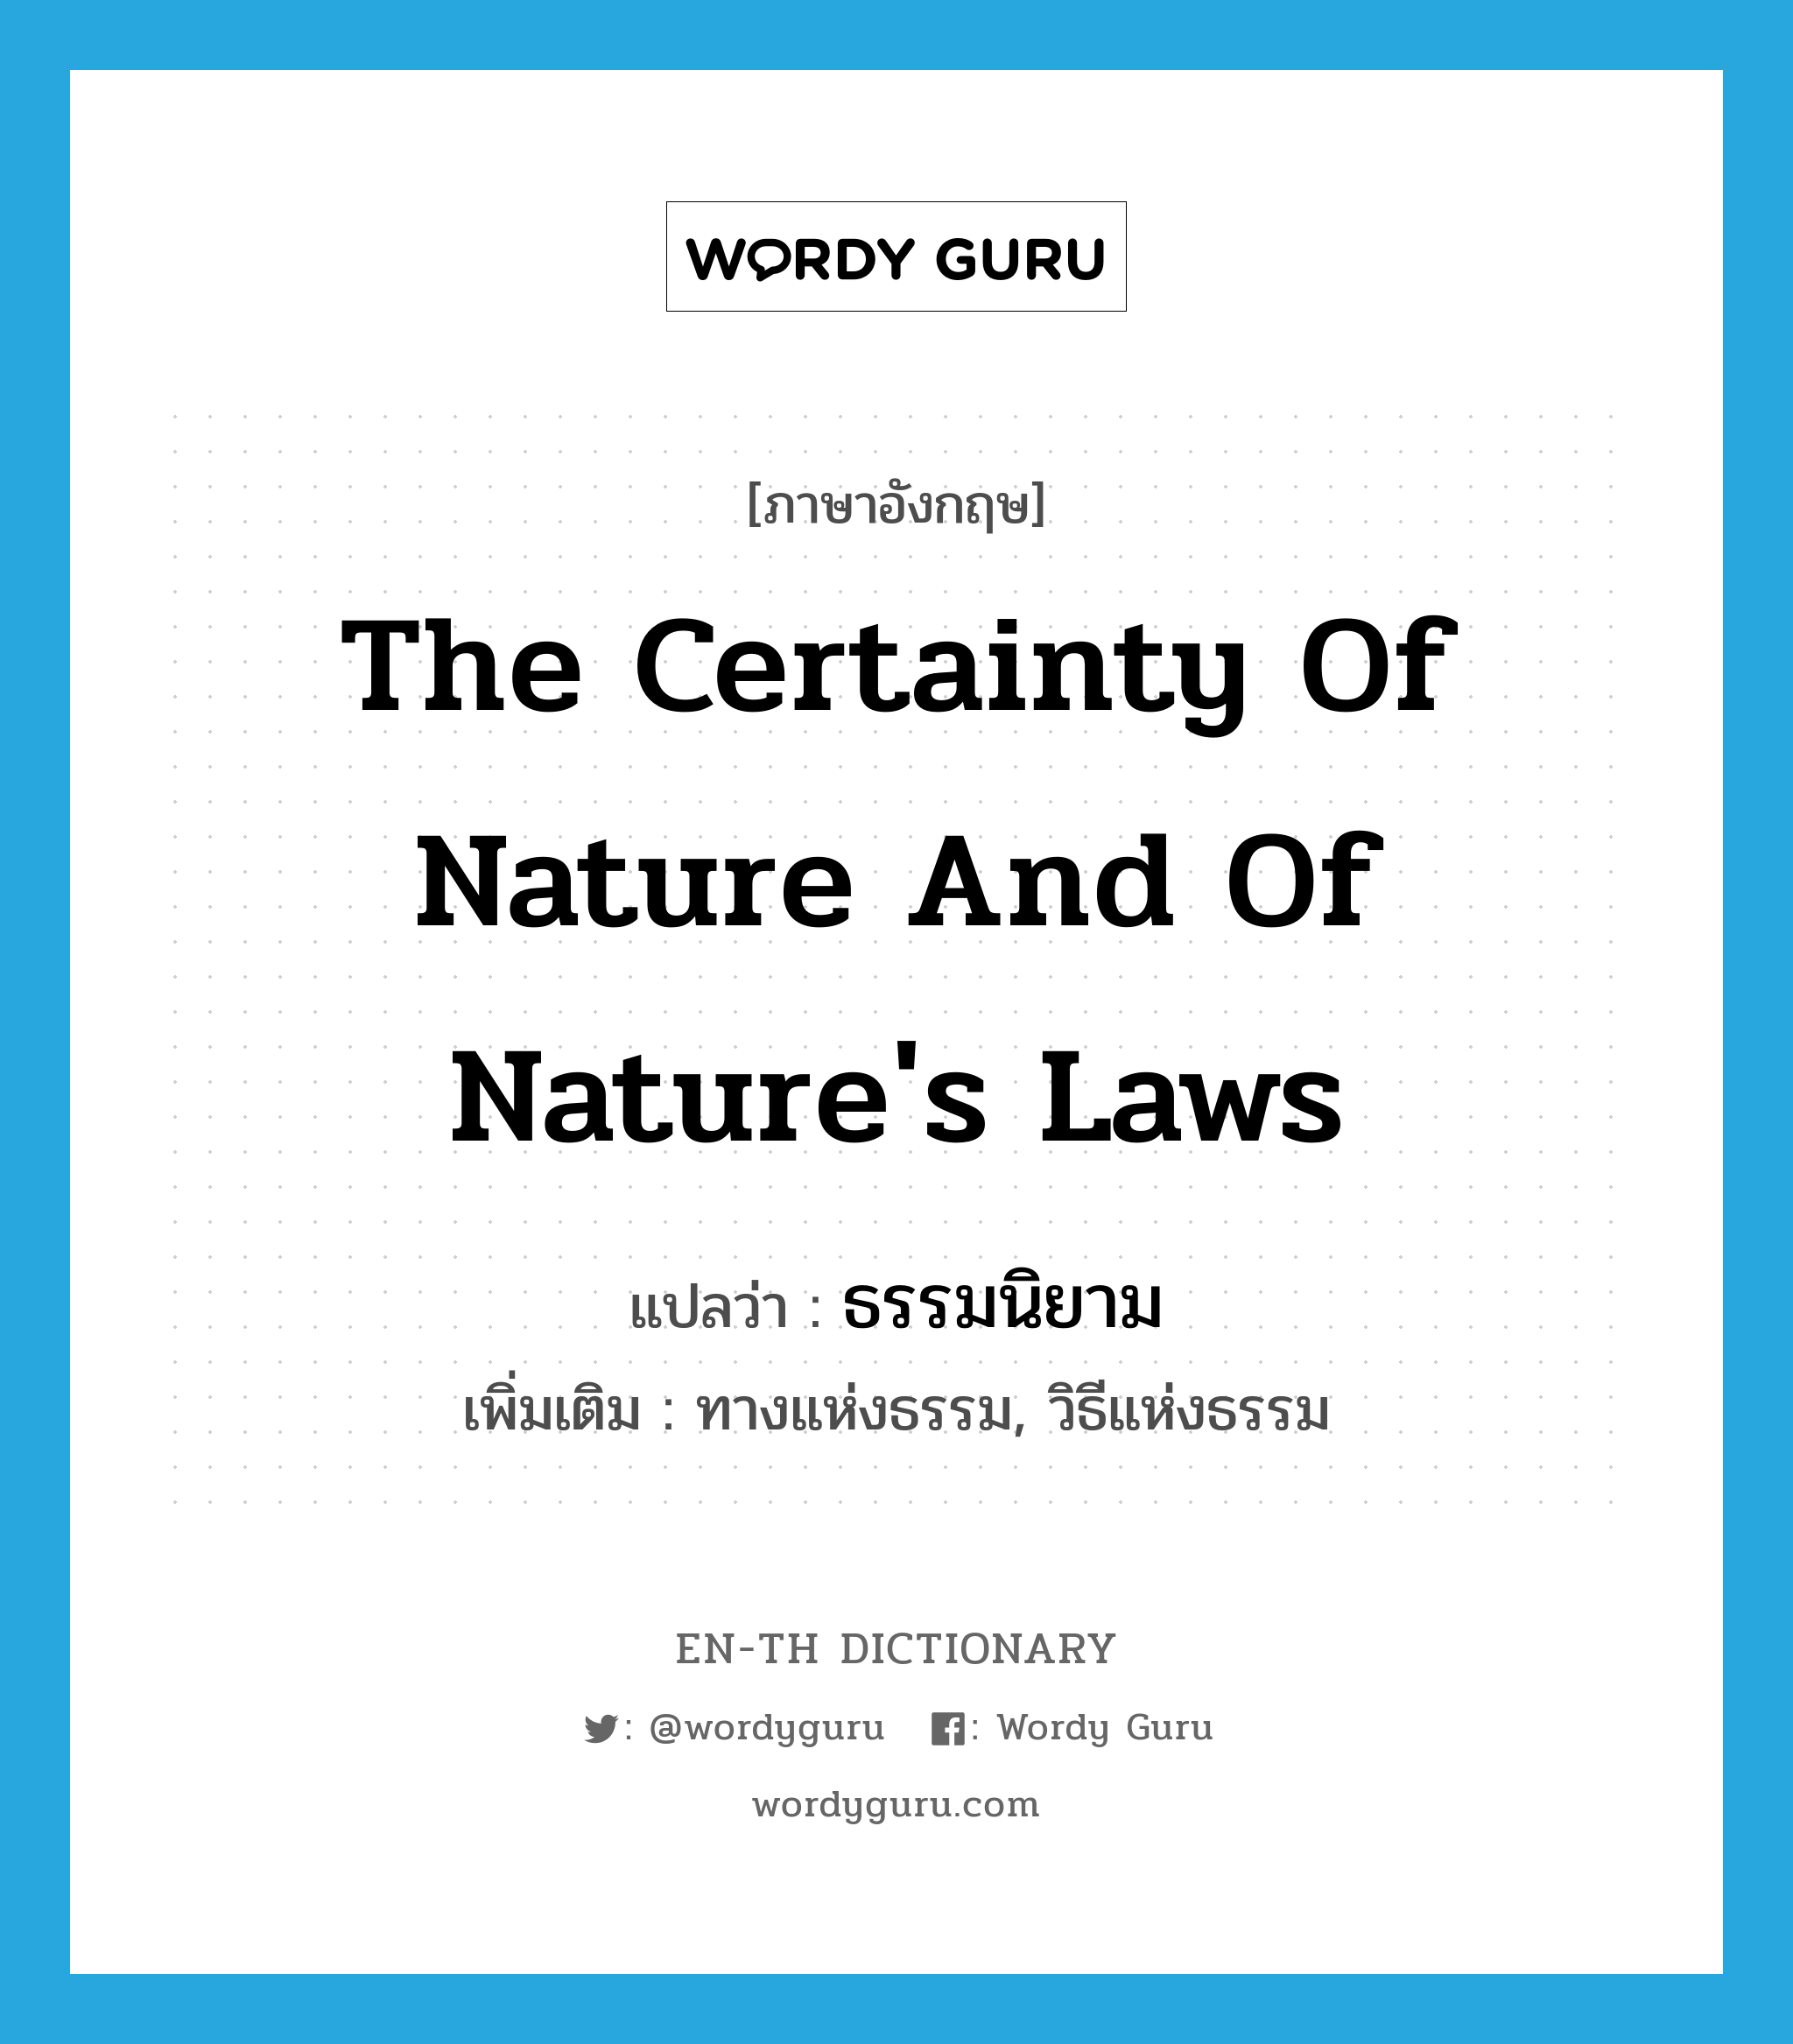 the certainty of nature and of nature's laws แปลว่า?, คำศัพท์ภาษาอังกฤษ the certainty of nature and of nature's laws แปลว่า ธรรมนิยาม ประเภท N เพิ่มเติม ทางแห่งธรรม, วิธีแห่งธรรม หมวด N